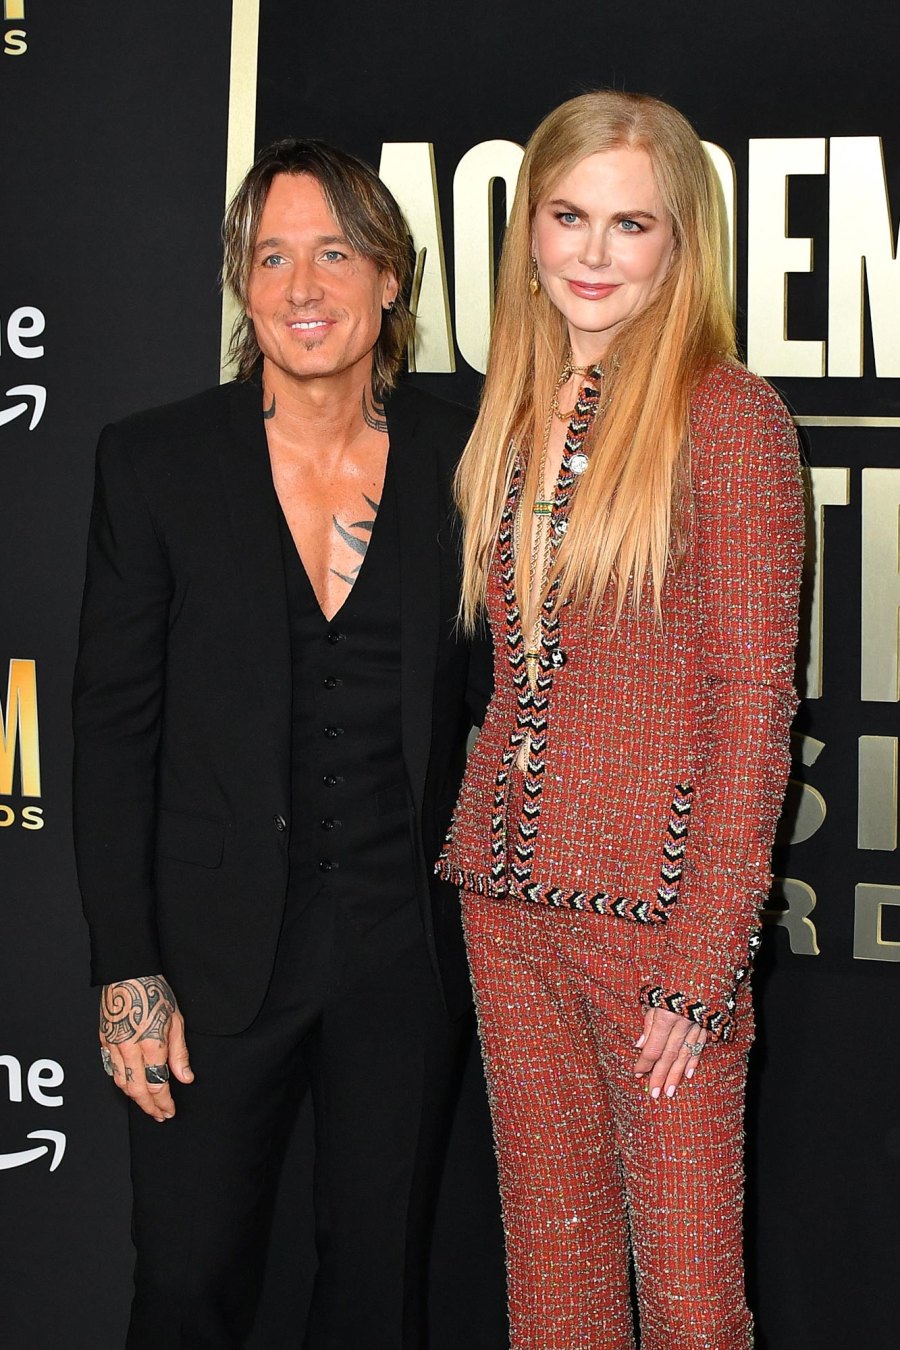 Nicole-Kidman-and-Keith-Urban--A-Timeline-of-Their-Relationship-620